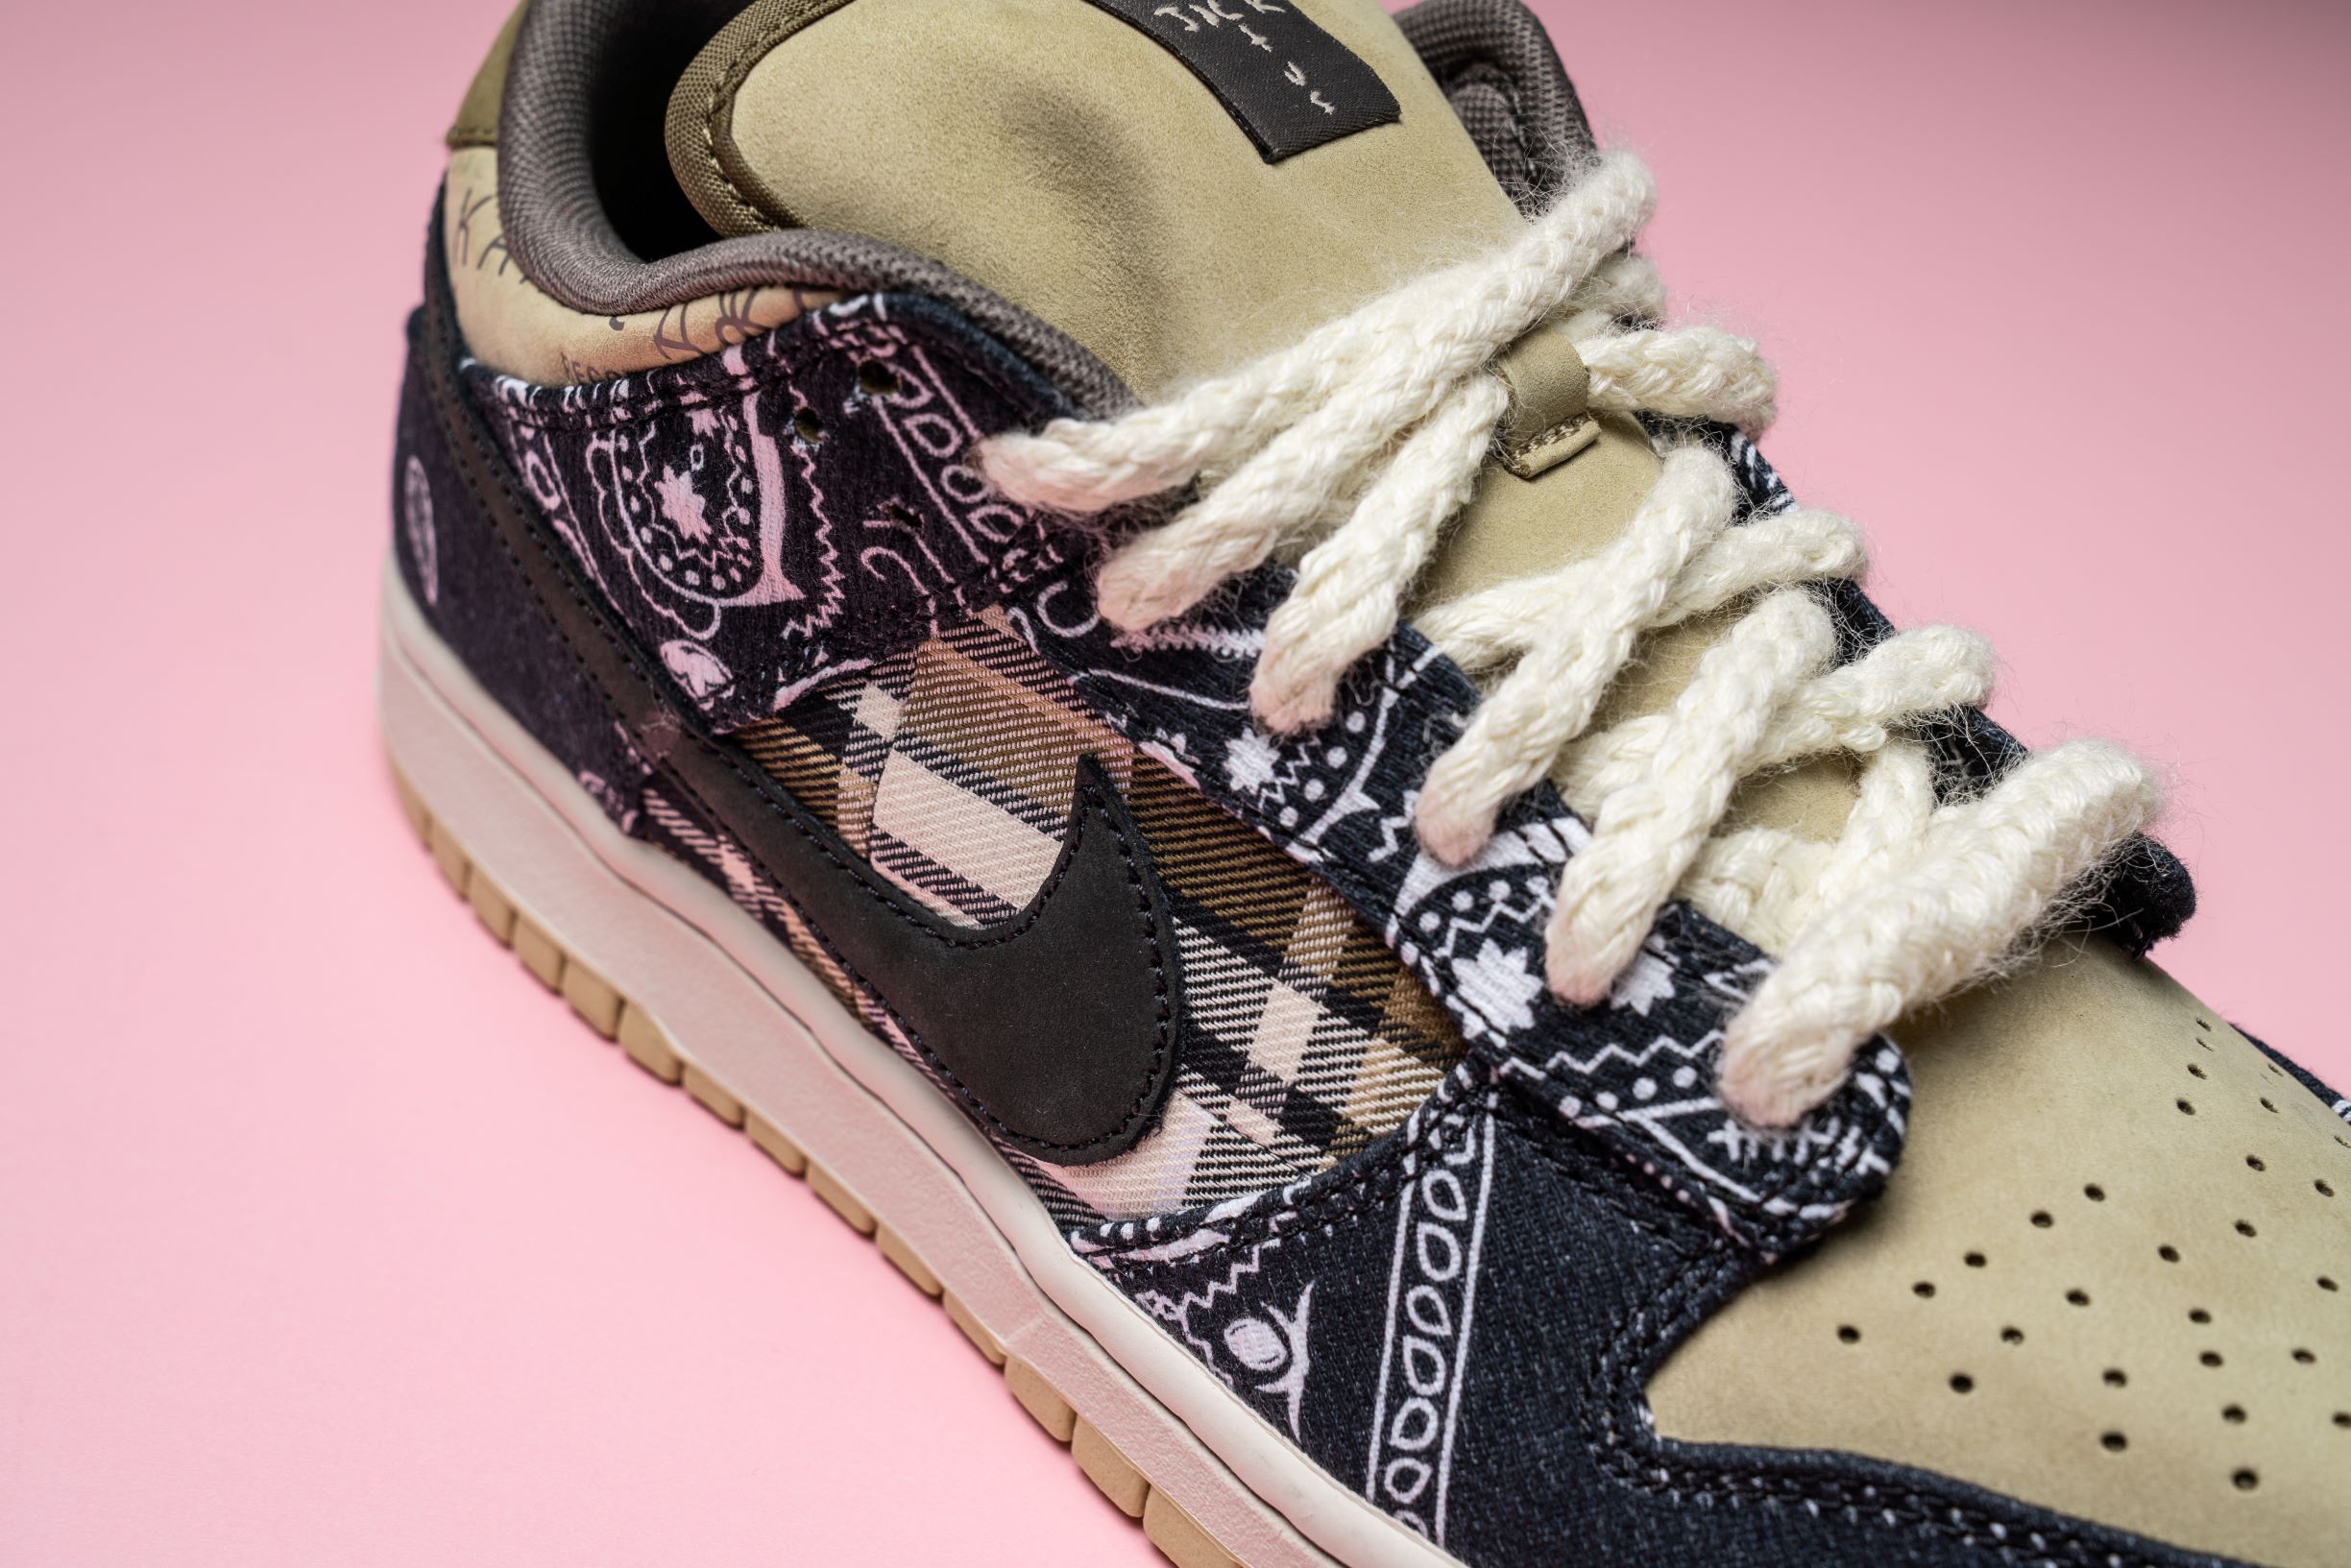 Nike Teams With Travis Scott For Bandanna-Print Dunk Low Sneakers